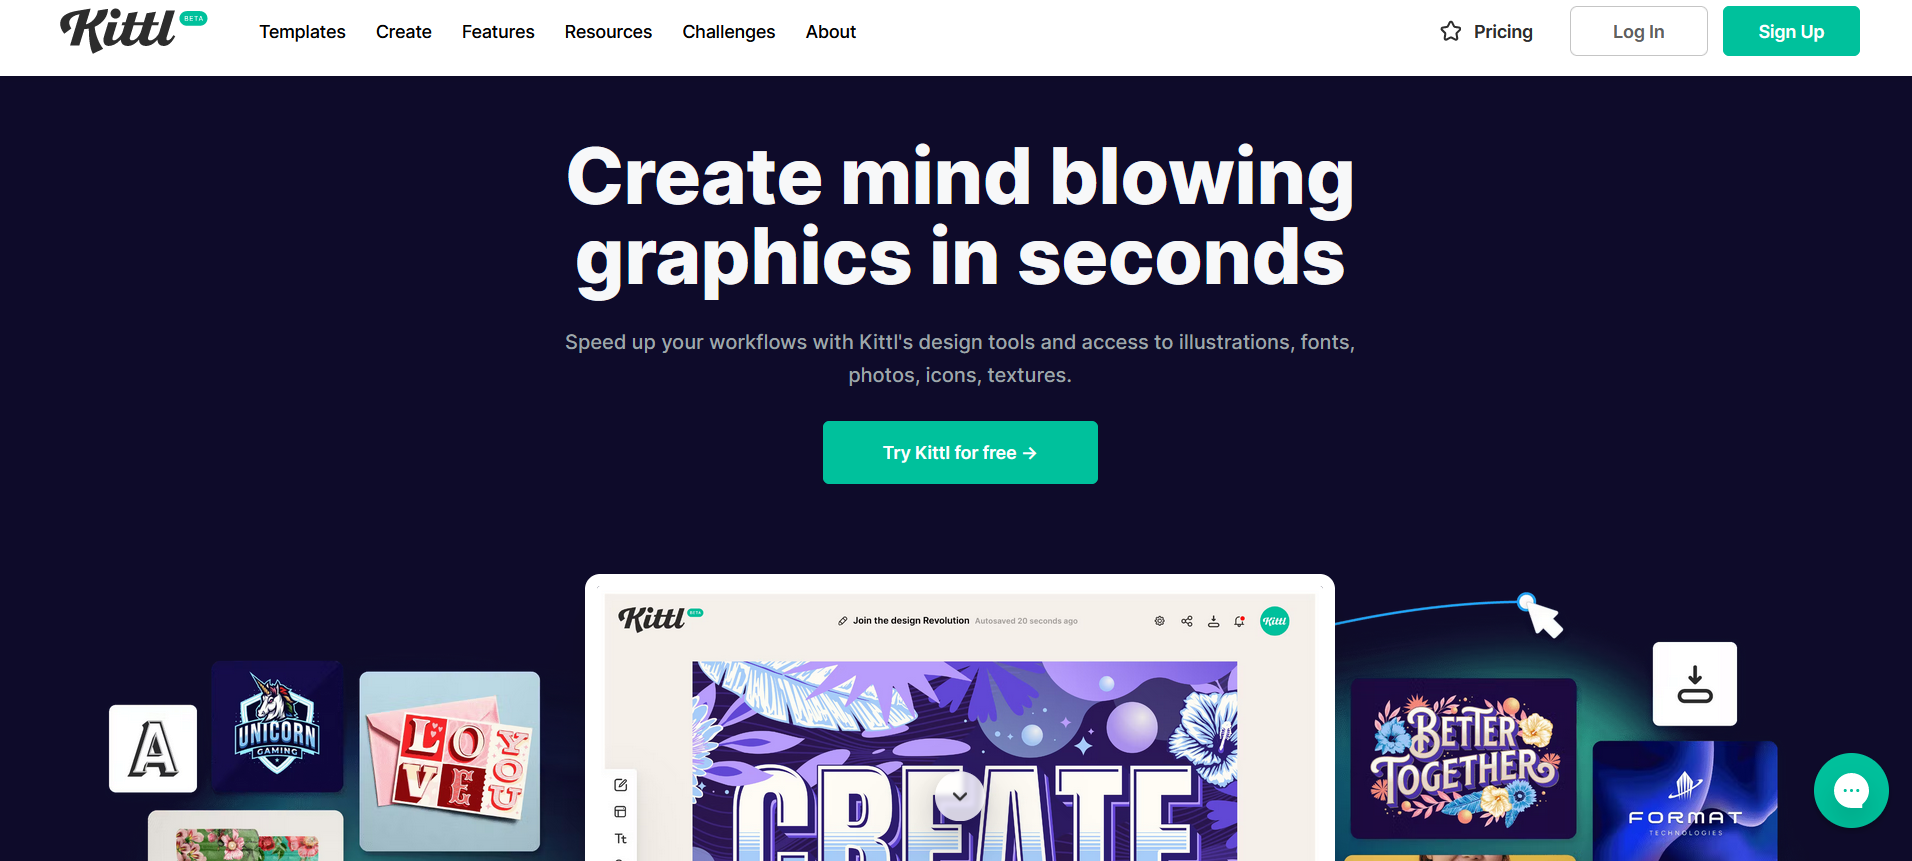 KittlKittl AI enables users to create stunning designs in just